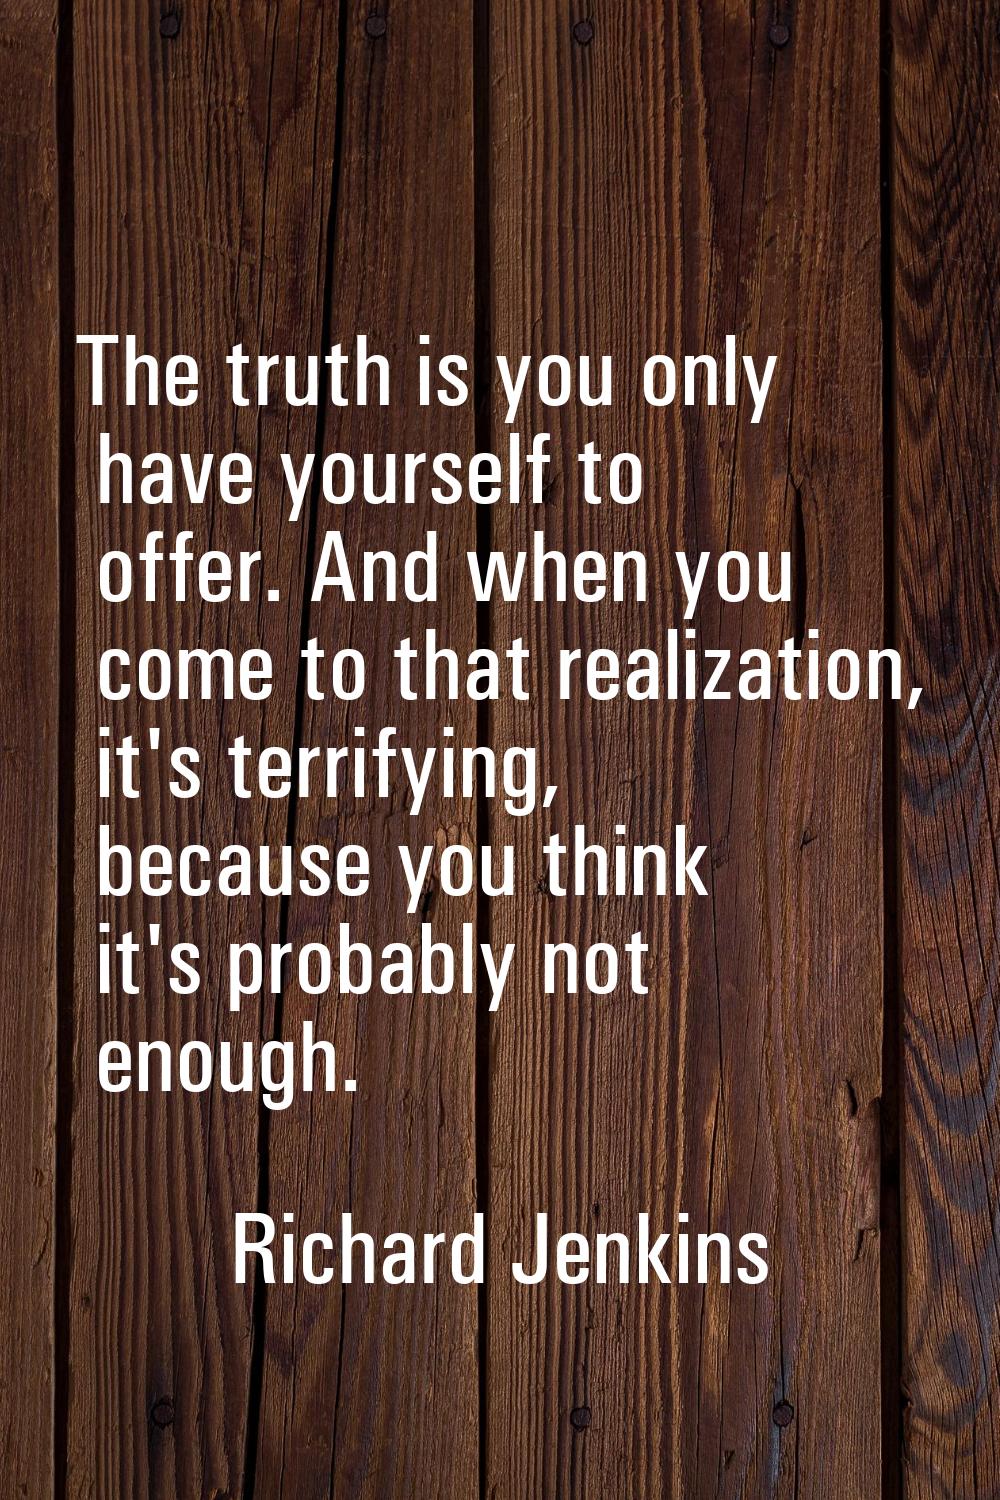 The truth is you only have yourself to offer. And when you come to that realization, it's terrifyin